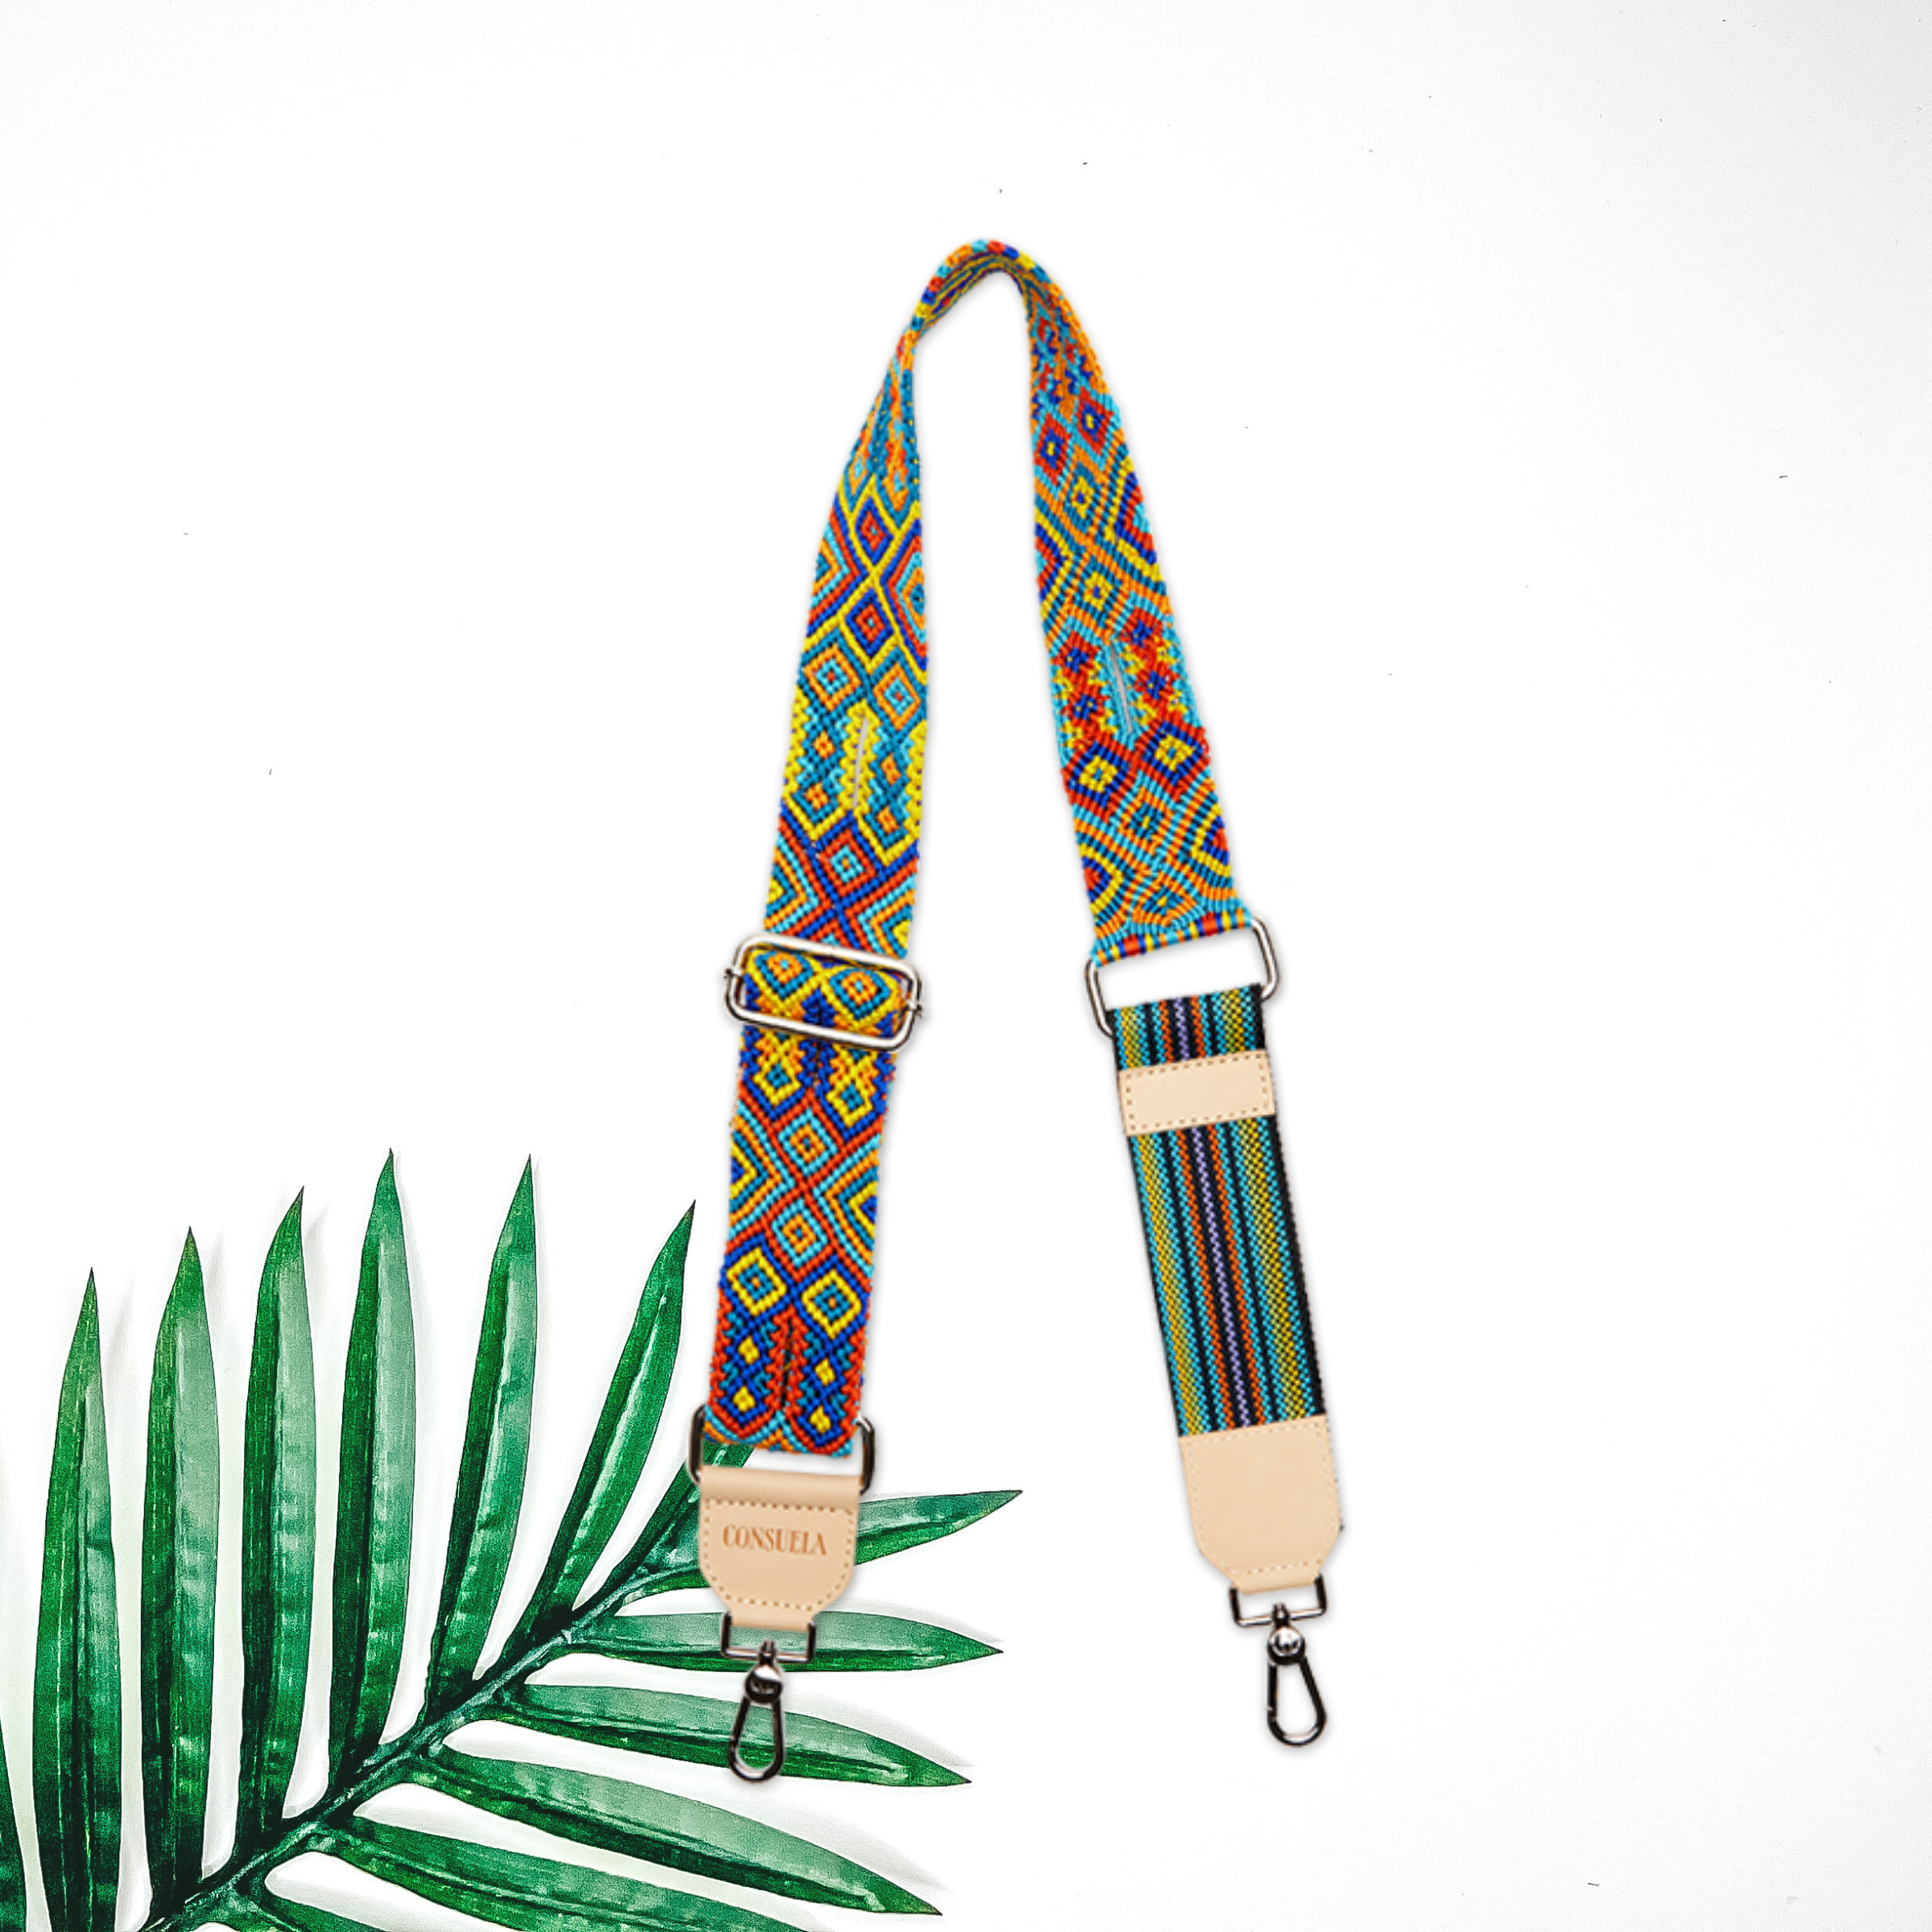 Centered in the picture is a woven crossbody purse strap. To the left of the strap is a palm leaf, all on a white background. 